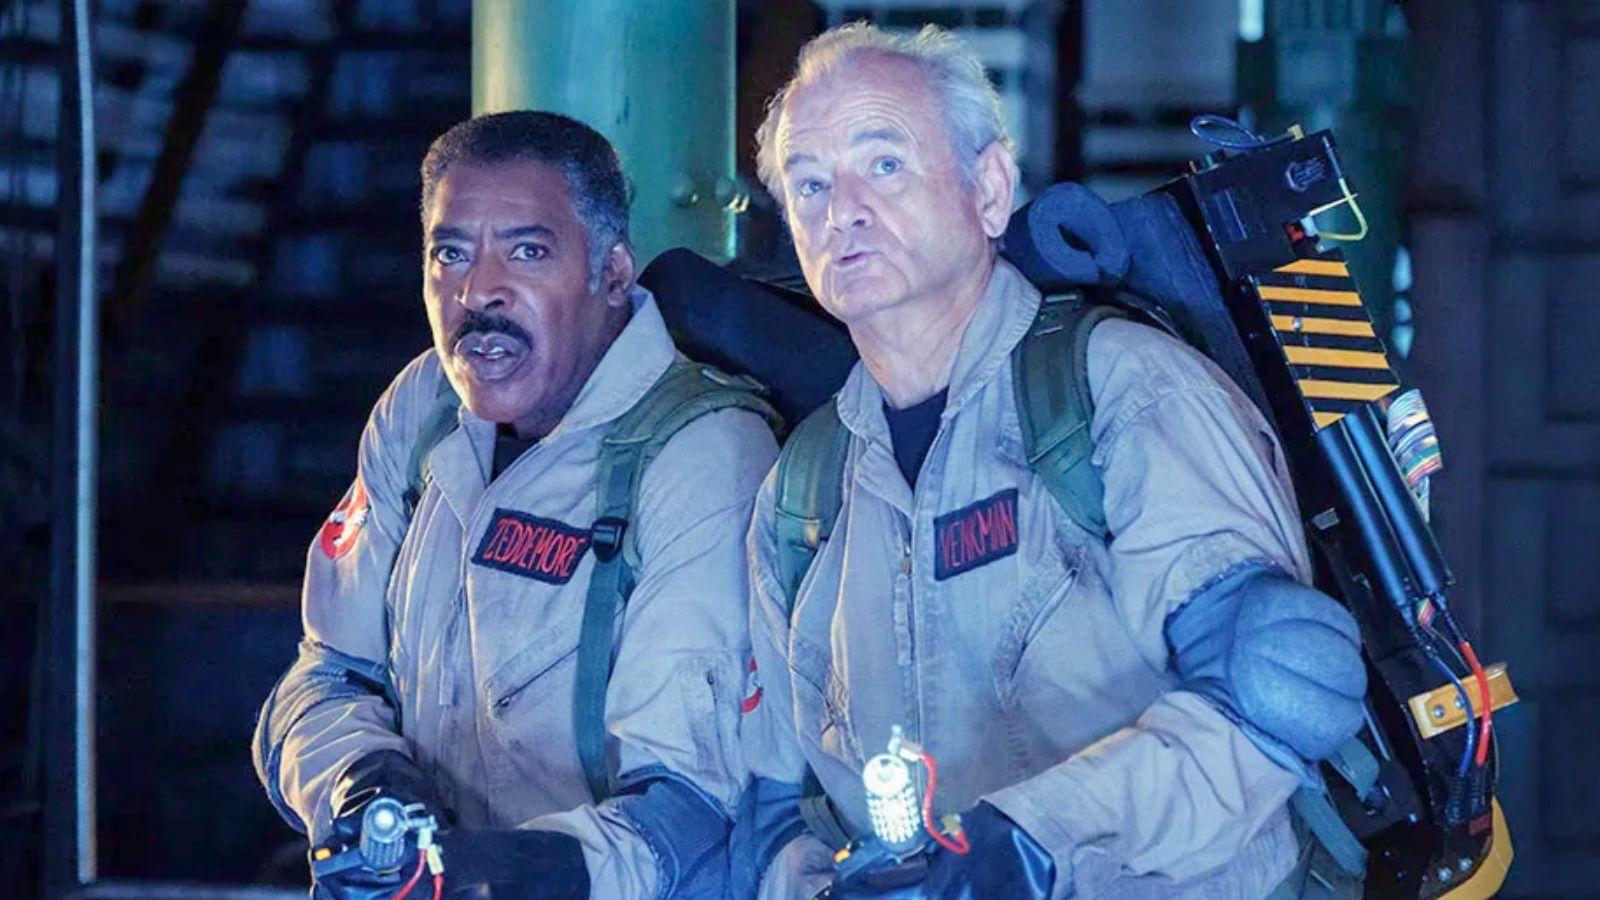 Venkman and Winston in Ghostbusters Frozen Empire. They stand in-uniform wearing proton packs.